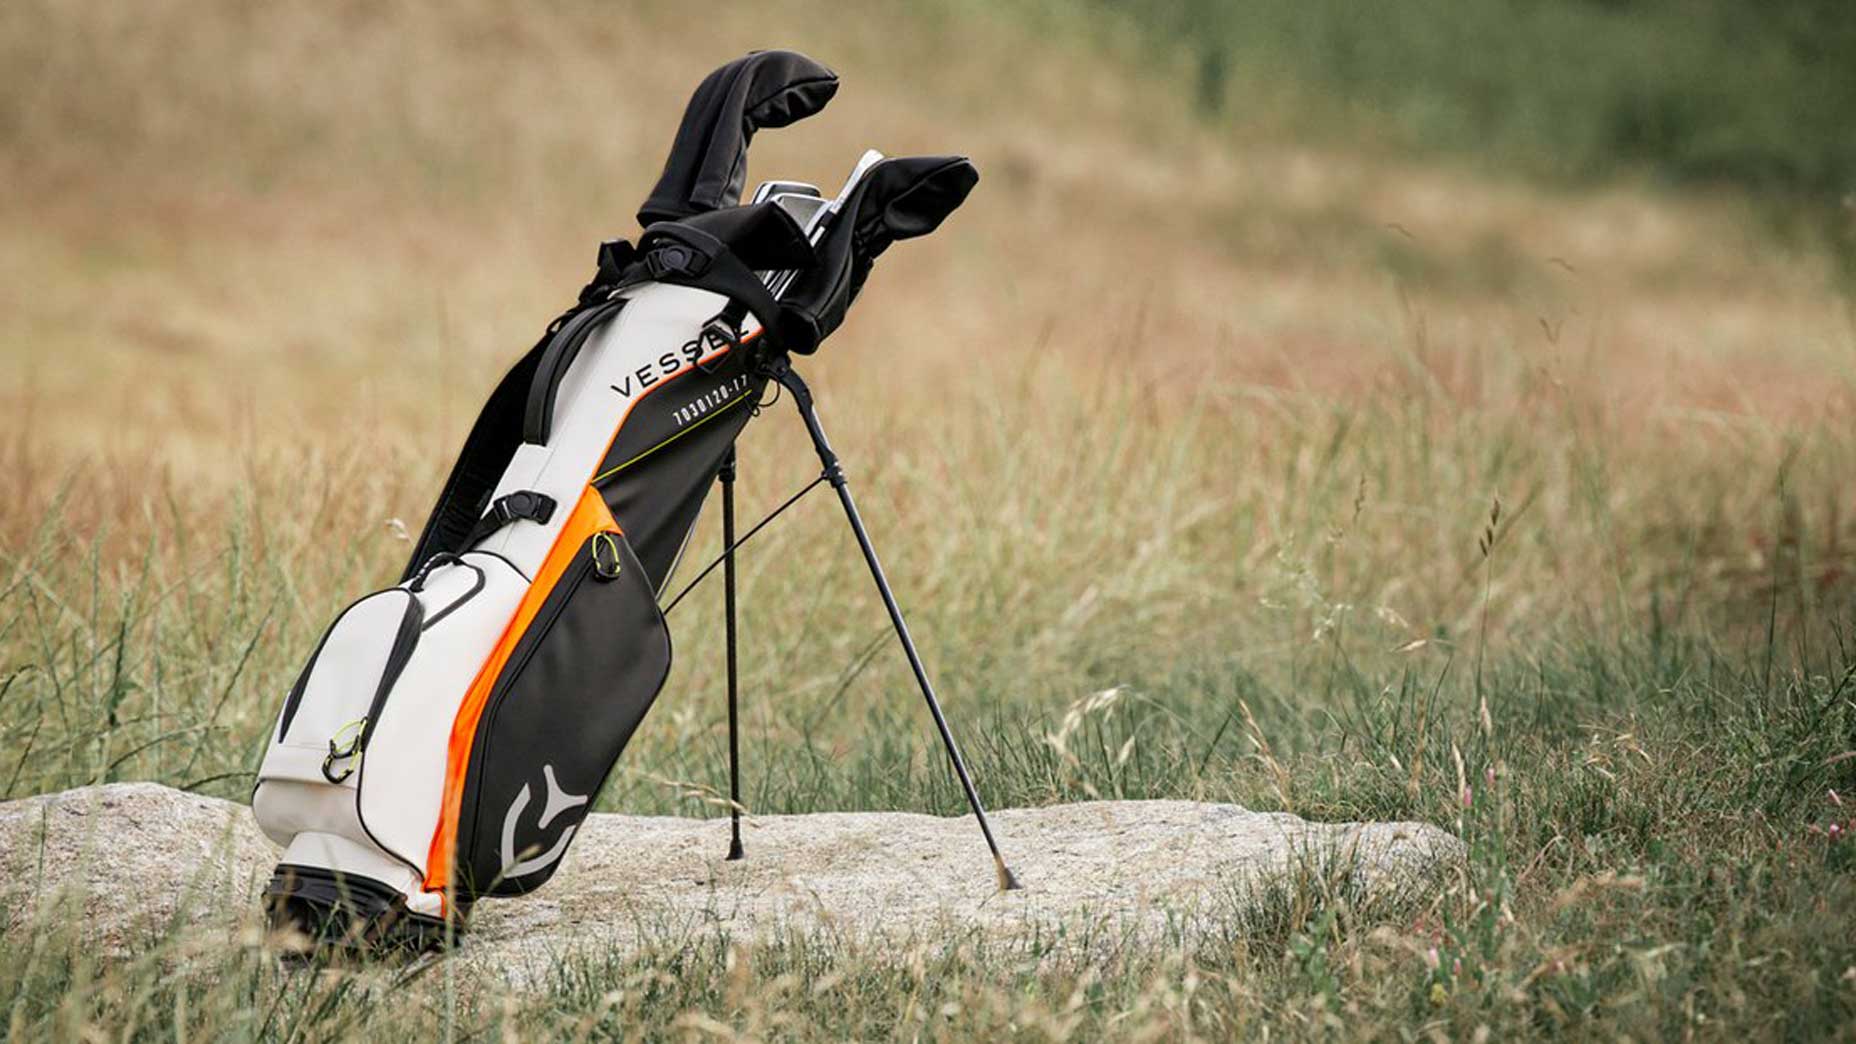 One thing to buy this week: Vessel VLX Stand bag